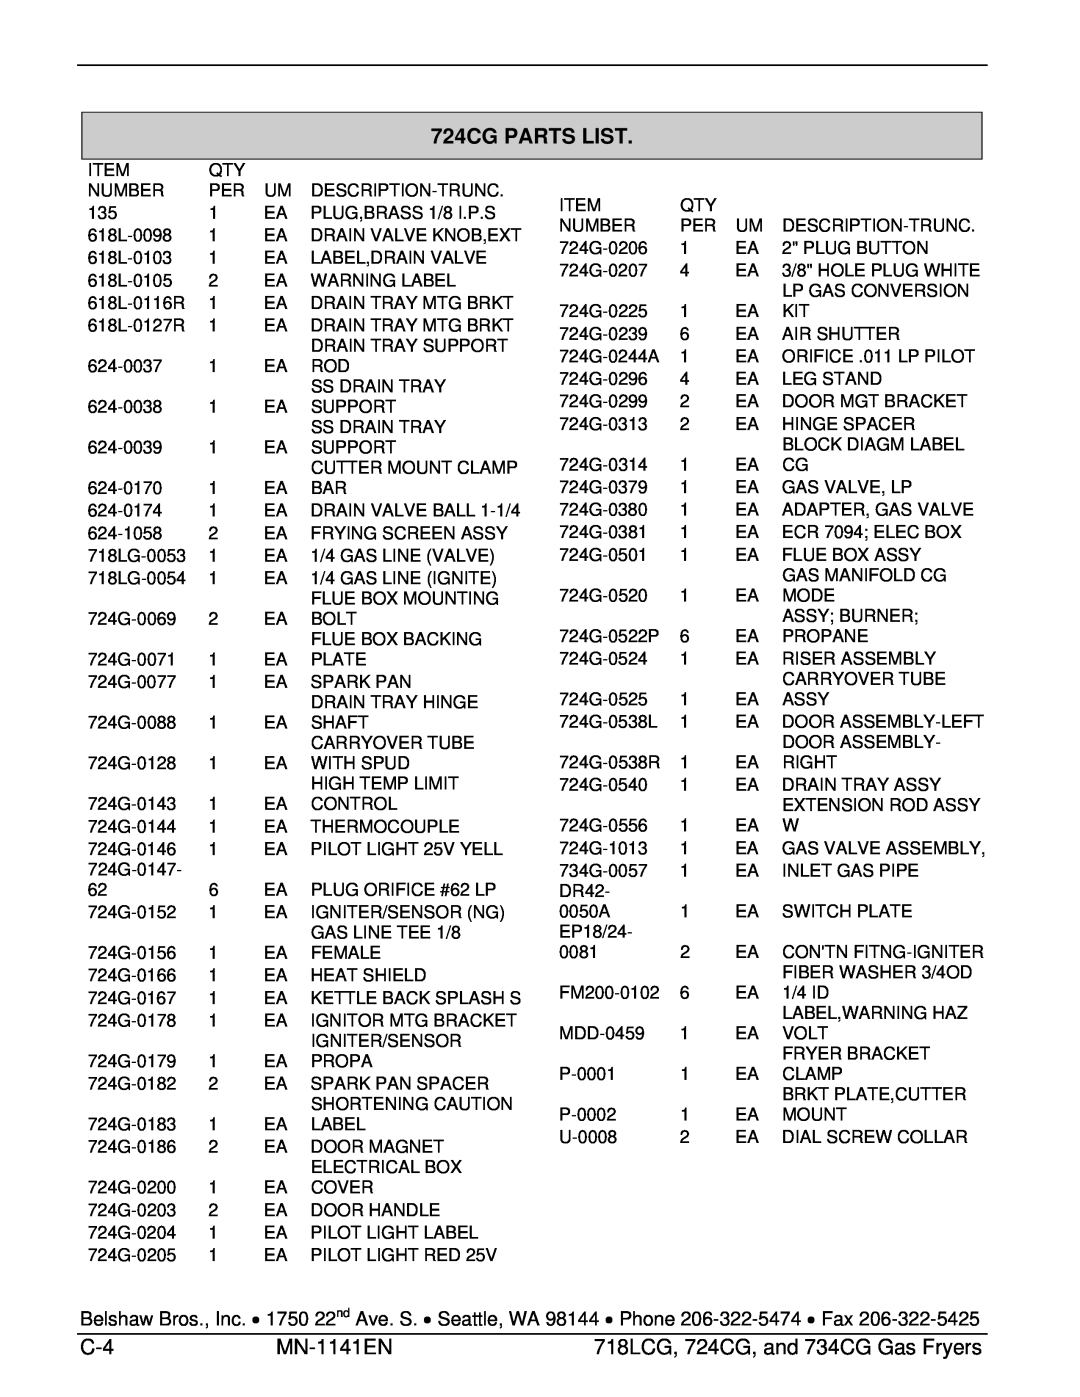 Belshaw Brothers manual 724CG PARTS LIST, MN-1141EN, 718LCG, 724CG, and 734CG Gas Fryers, Gas Valve Assembly 